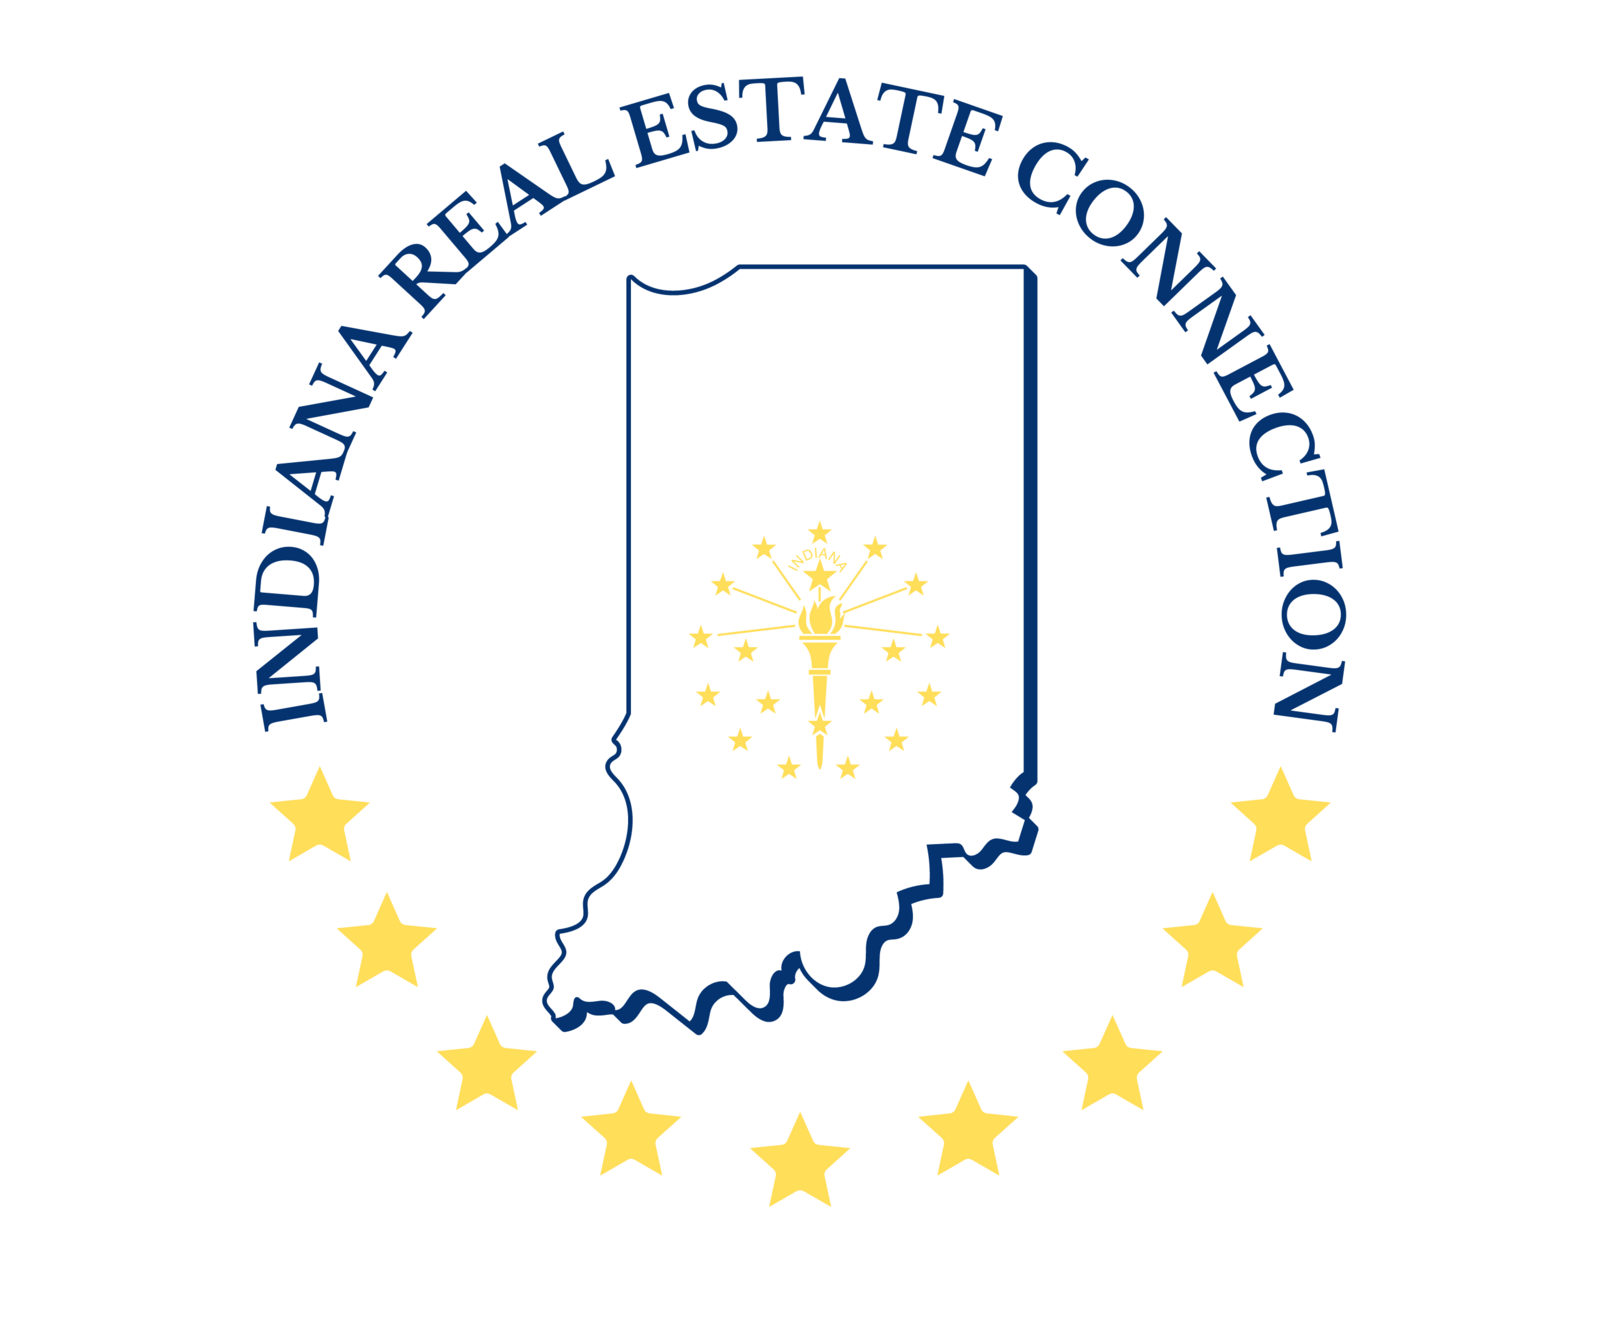 Indiana Real Estate Connection